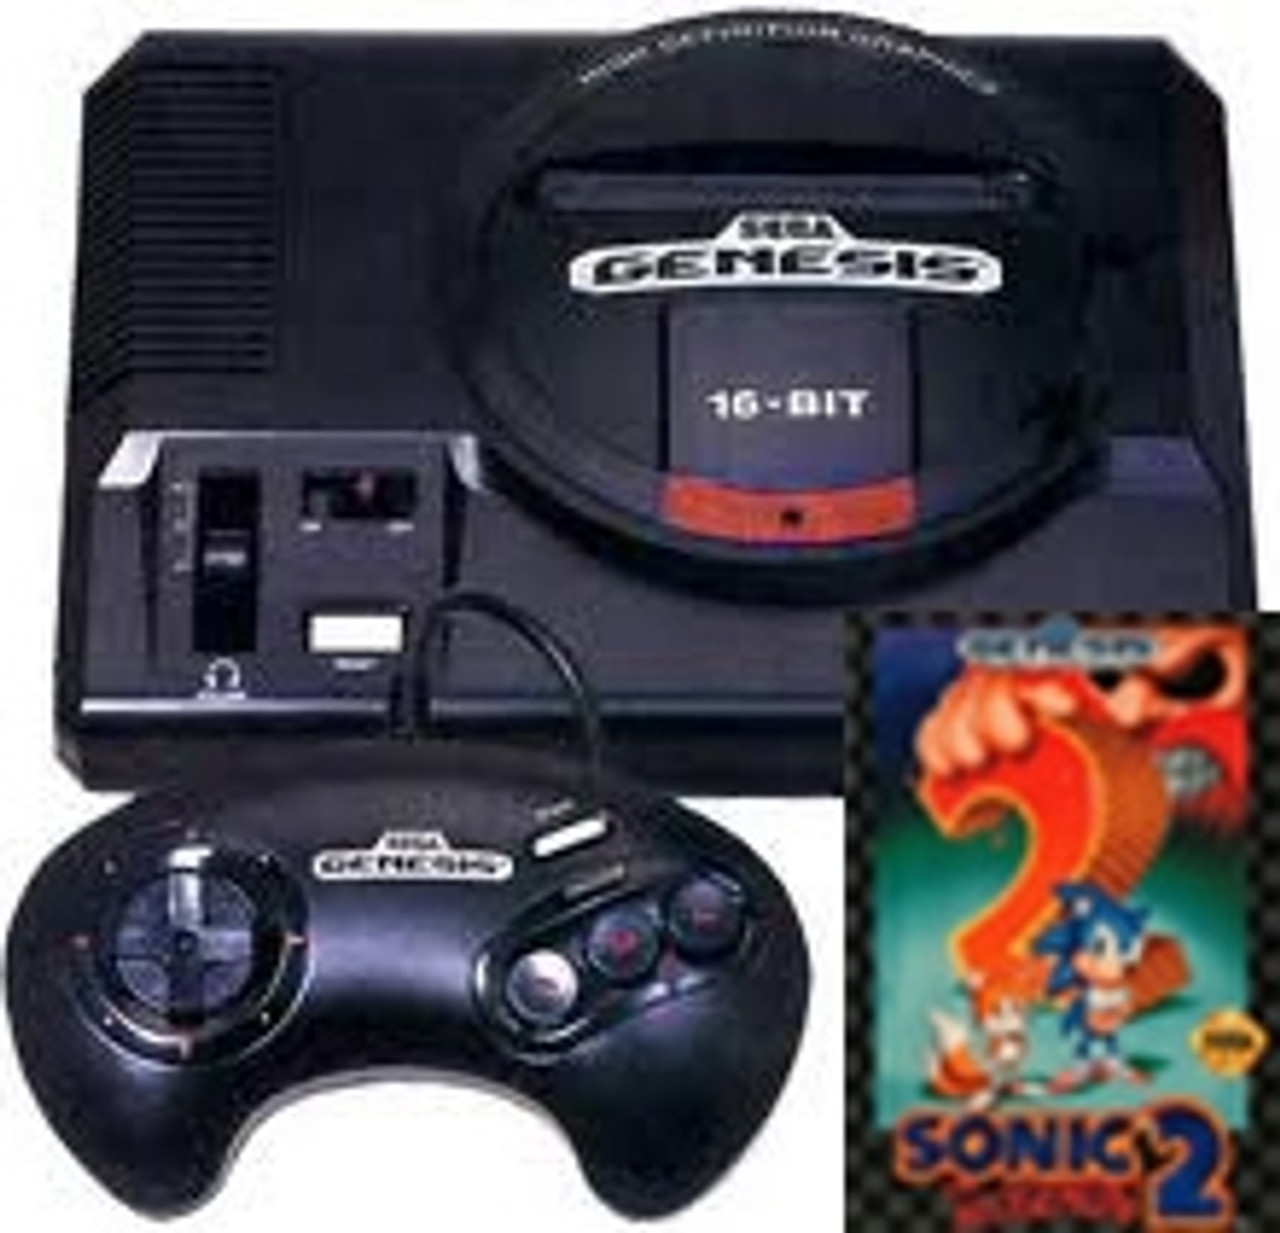 2 Sega game gear games sonic & sonic 2 - Lil Dusty Online Auctions - All  Estate Services, LLC